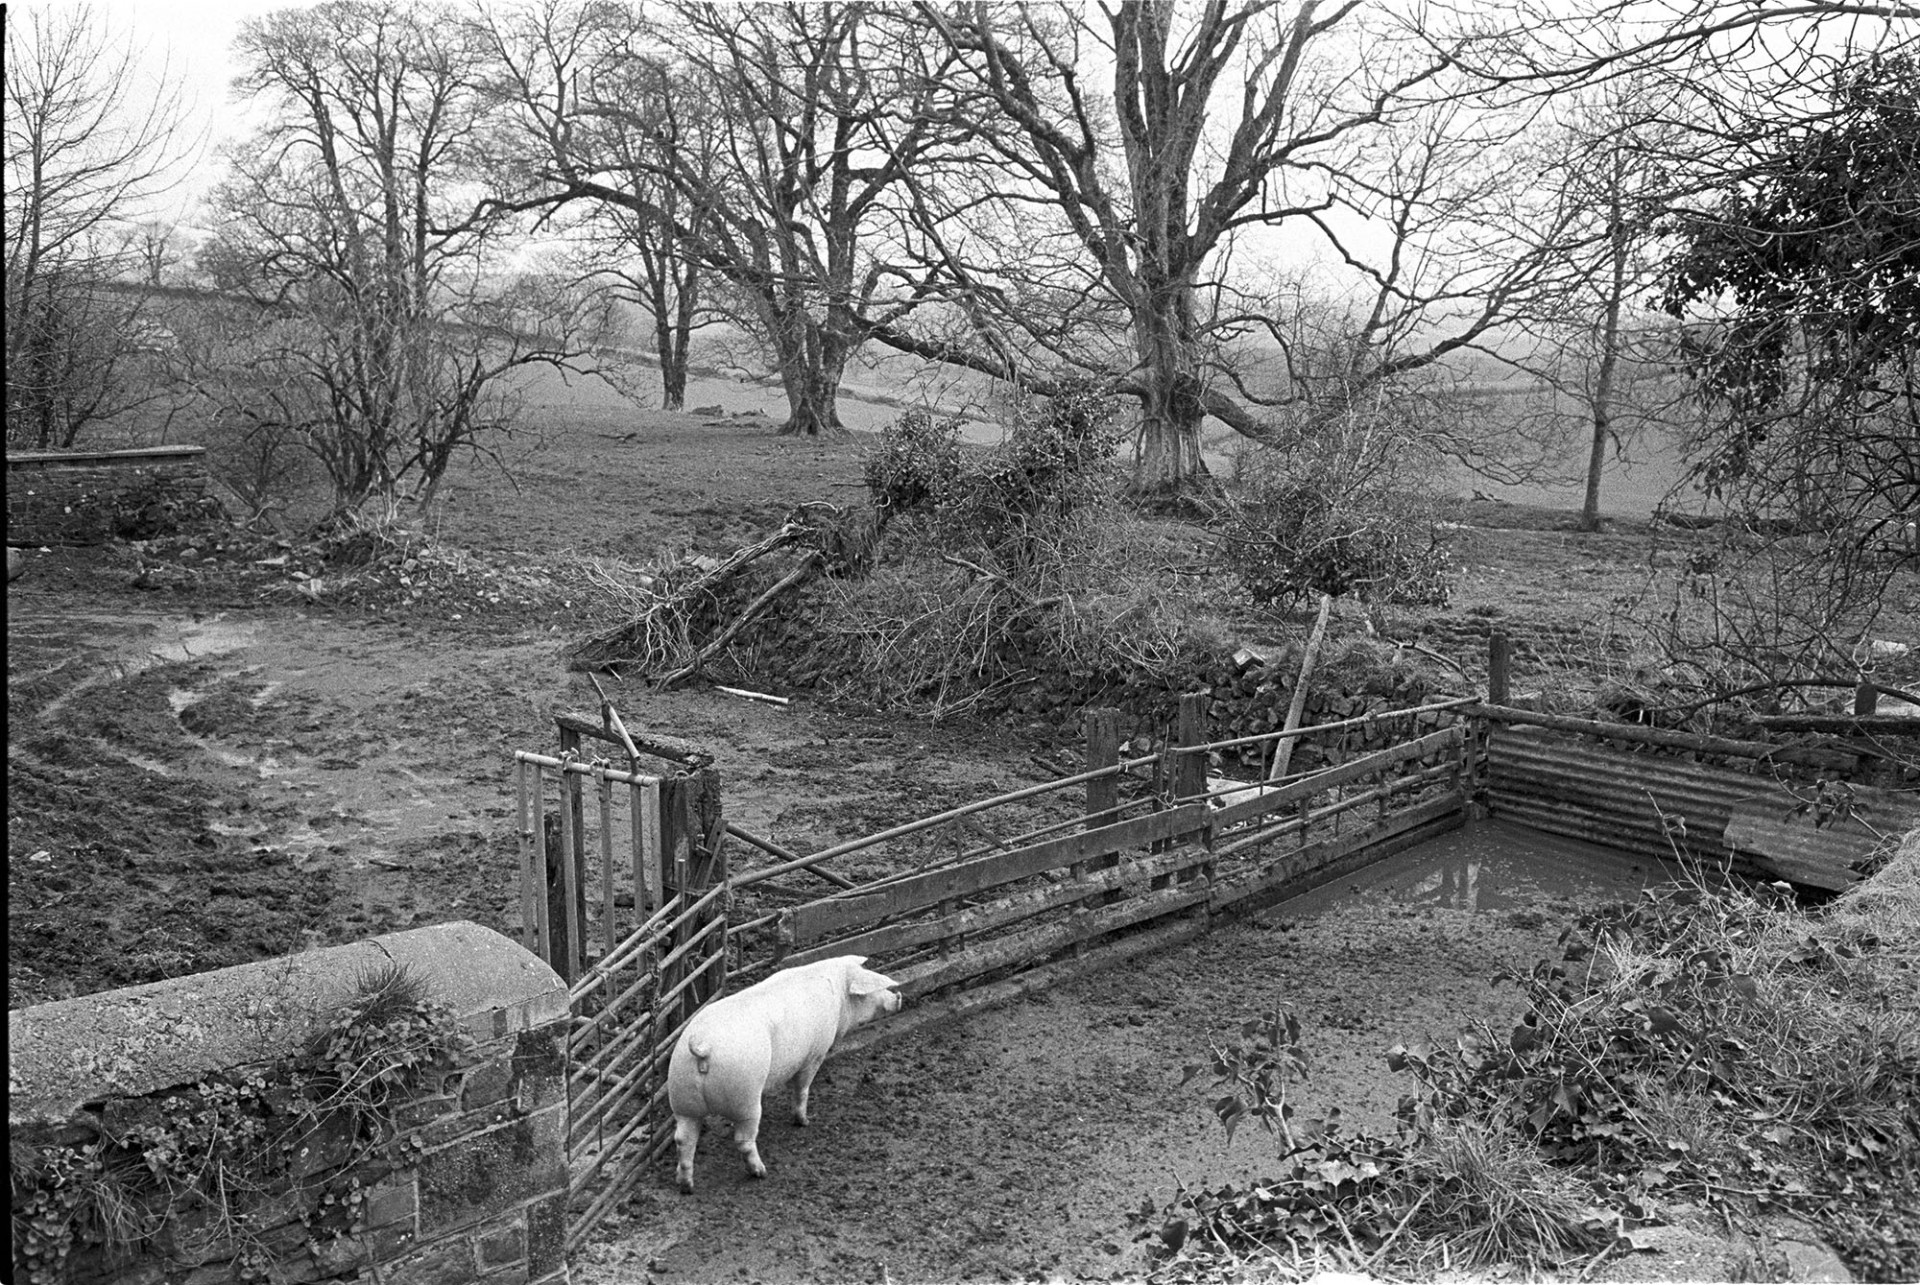 Pigsty and pig in muddy yard and desolate landscape. 
[A pig in a muddy pigsty at Heanton Barton, Merton. A landscape with a muddy field and trees is visible in the background.]